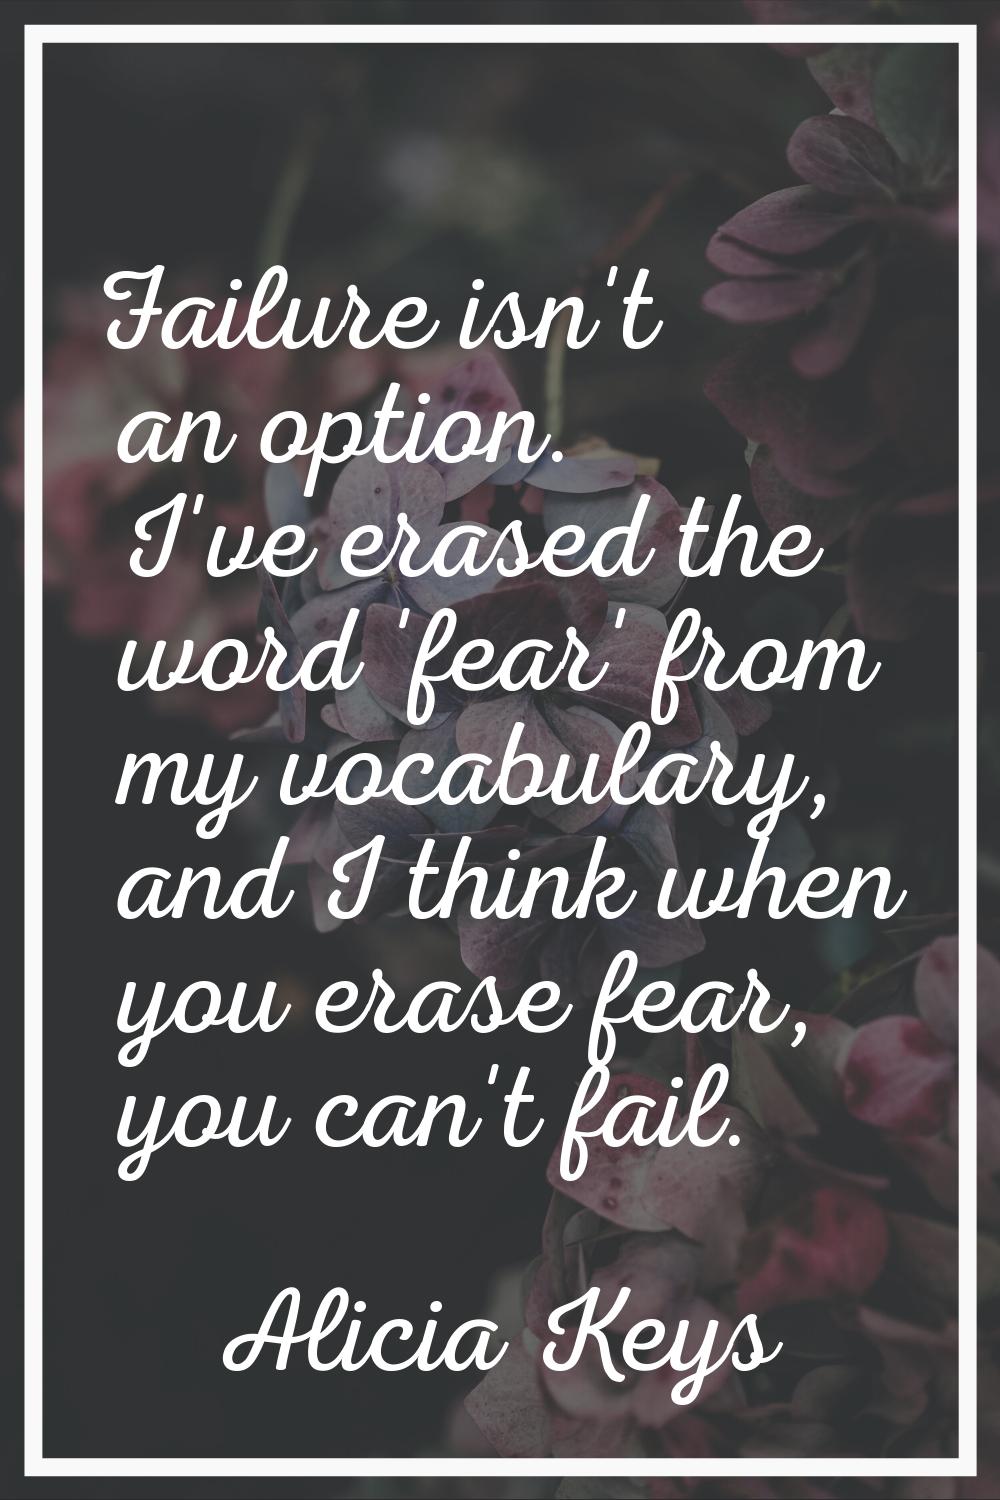 Failure isn't an option. I've erased the word 'fear' from my vocabulary, and I think when you erase